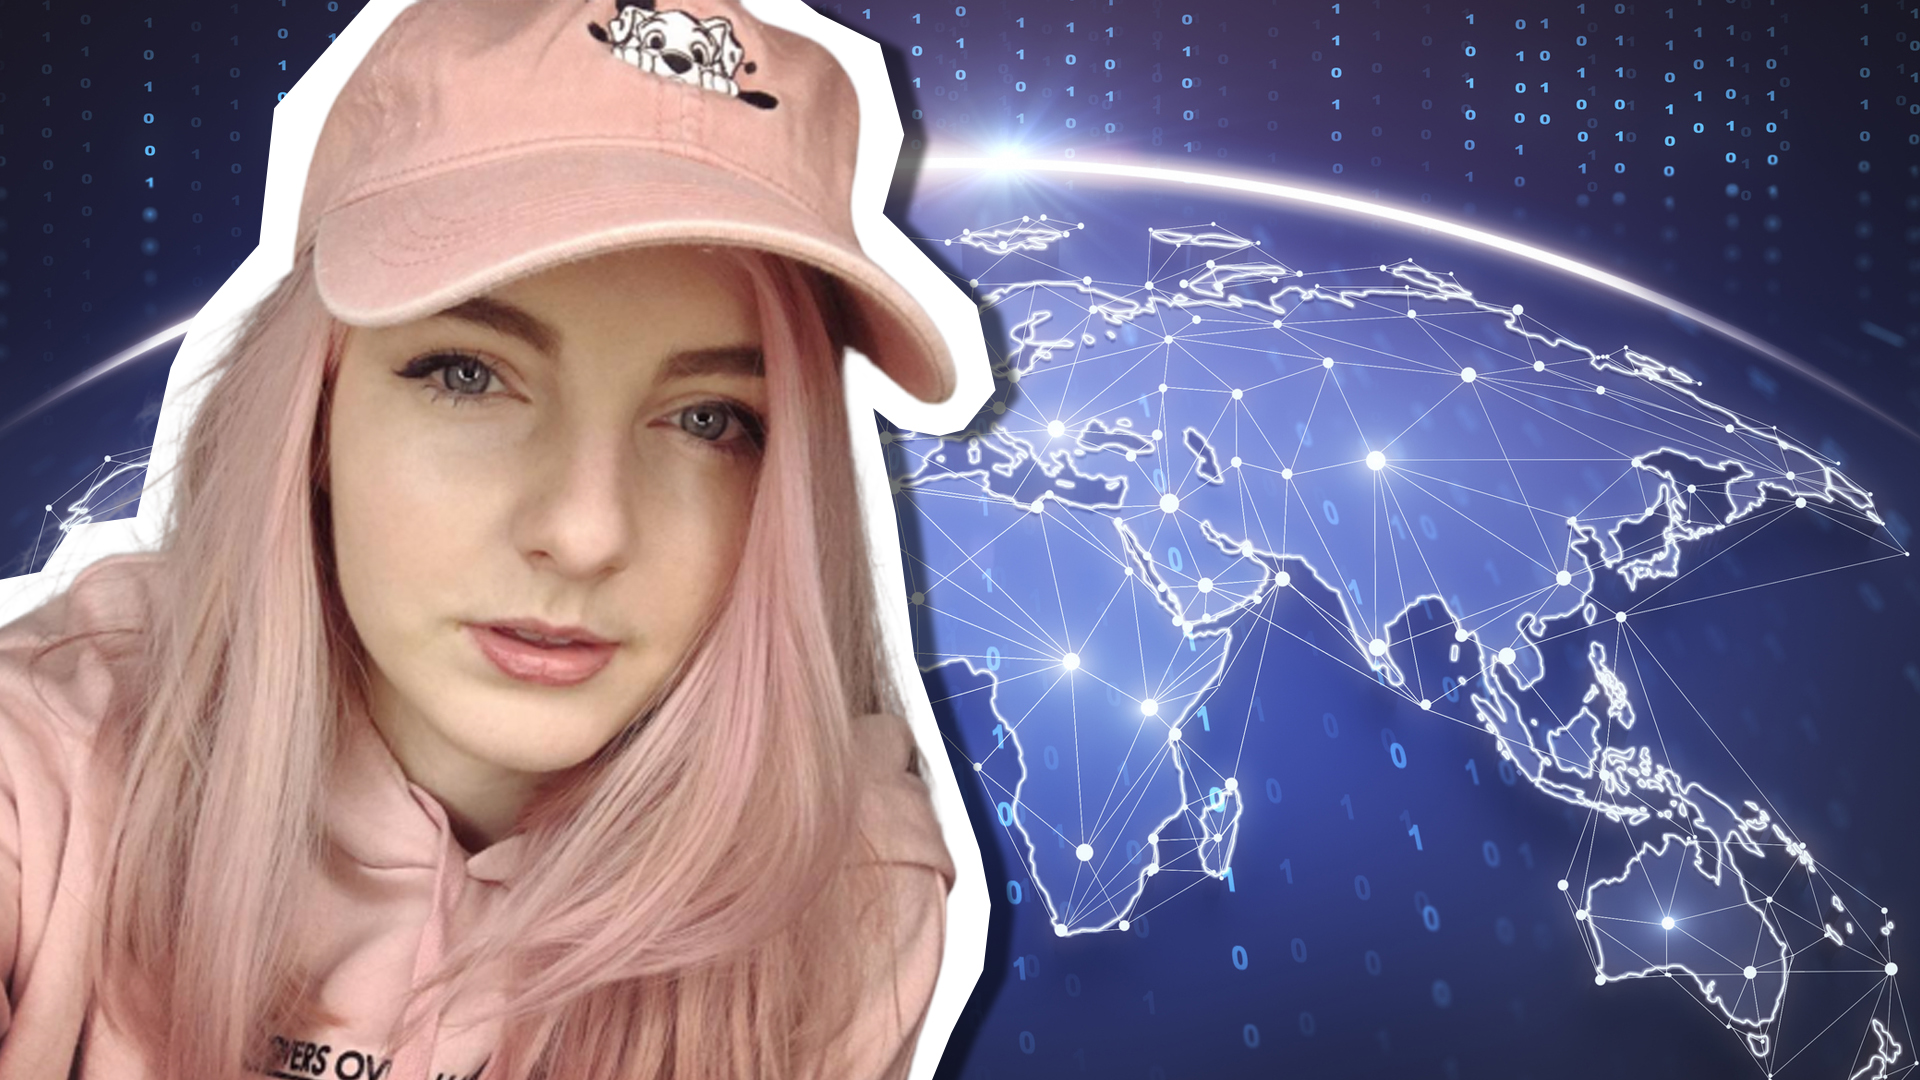 ldshadowlady and world map | How Well Do You Know LDShadowLady